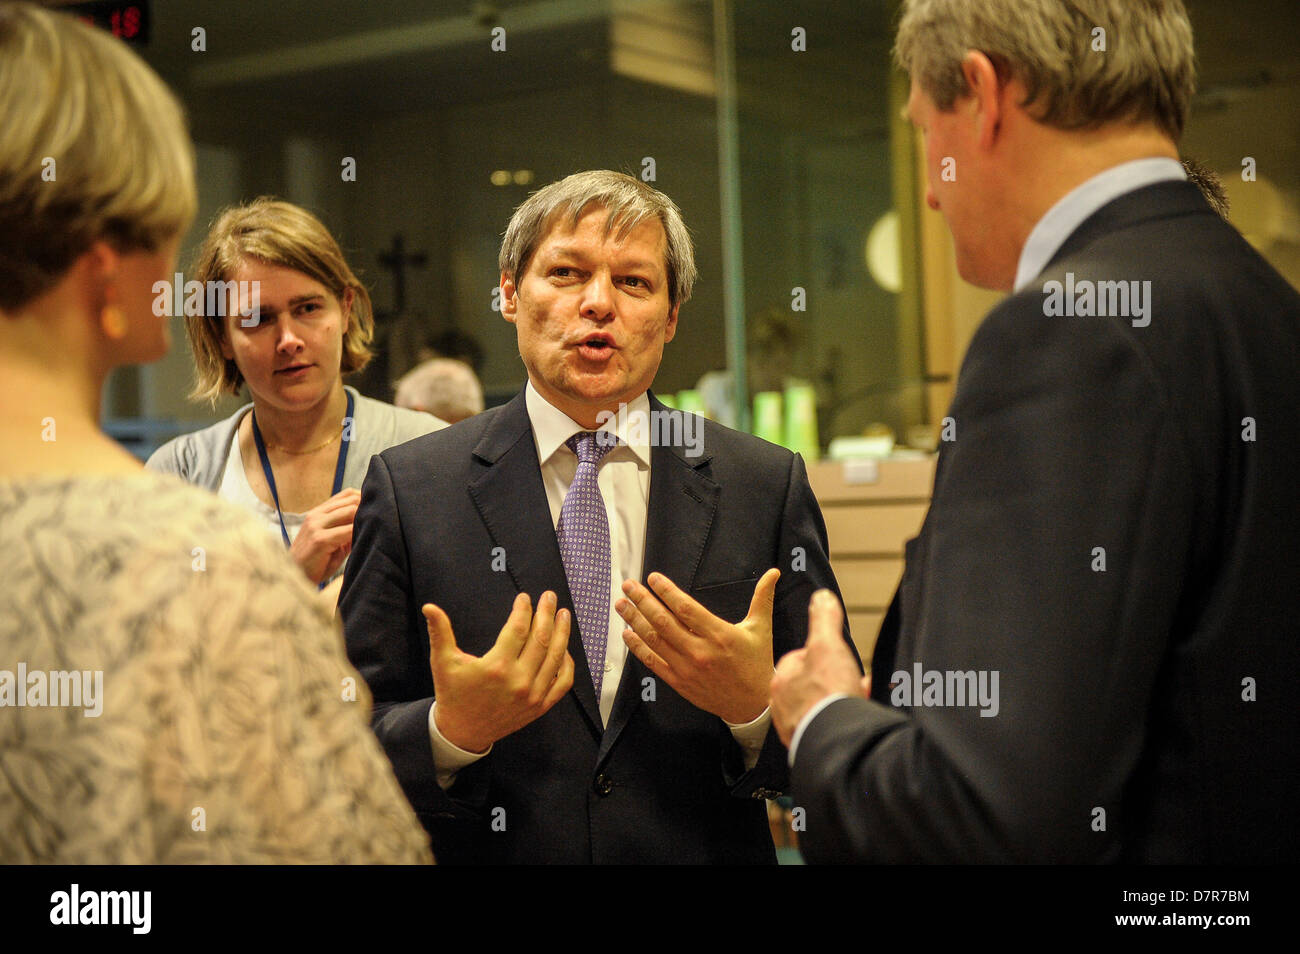 Brussels, Belgium. May 13, 2013.  Dacian Ciolos, the European Commissioner for Agriculture and Rural Development   prior to  Agriculture and Fisheries council at the EU Headquarters  in Brussels, Belgium on 13.05.2013 Fisheries ministers meet  to revise their position on the reform of EU fishing rules. The reluctance of some countries, including France, Spain and Poland, to find common ground with the Parliament on key issues of the reform is threatening to cause the collapse of negotiations on a new Common Fisheries PolicyP).  by Wiktor Dabkowski (Credit Image: © Wiktor Dabkowski/ZU. Stock Photo